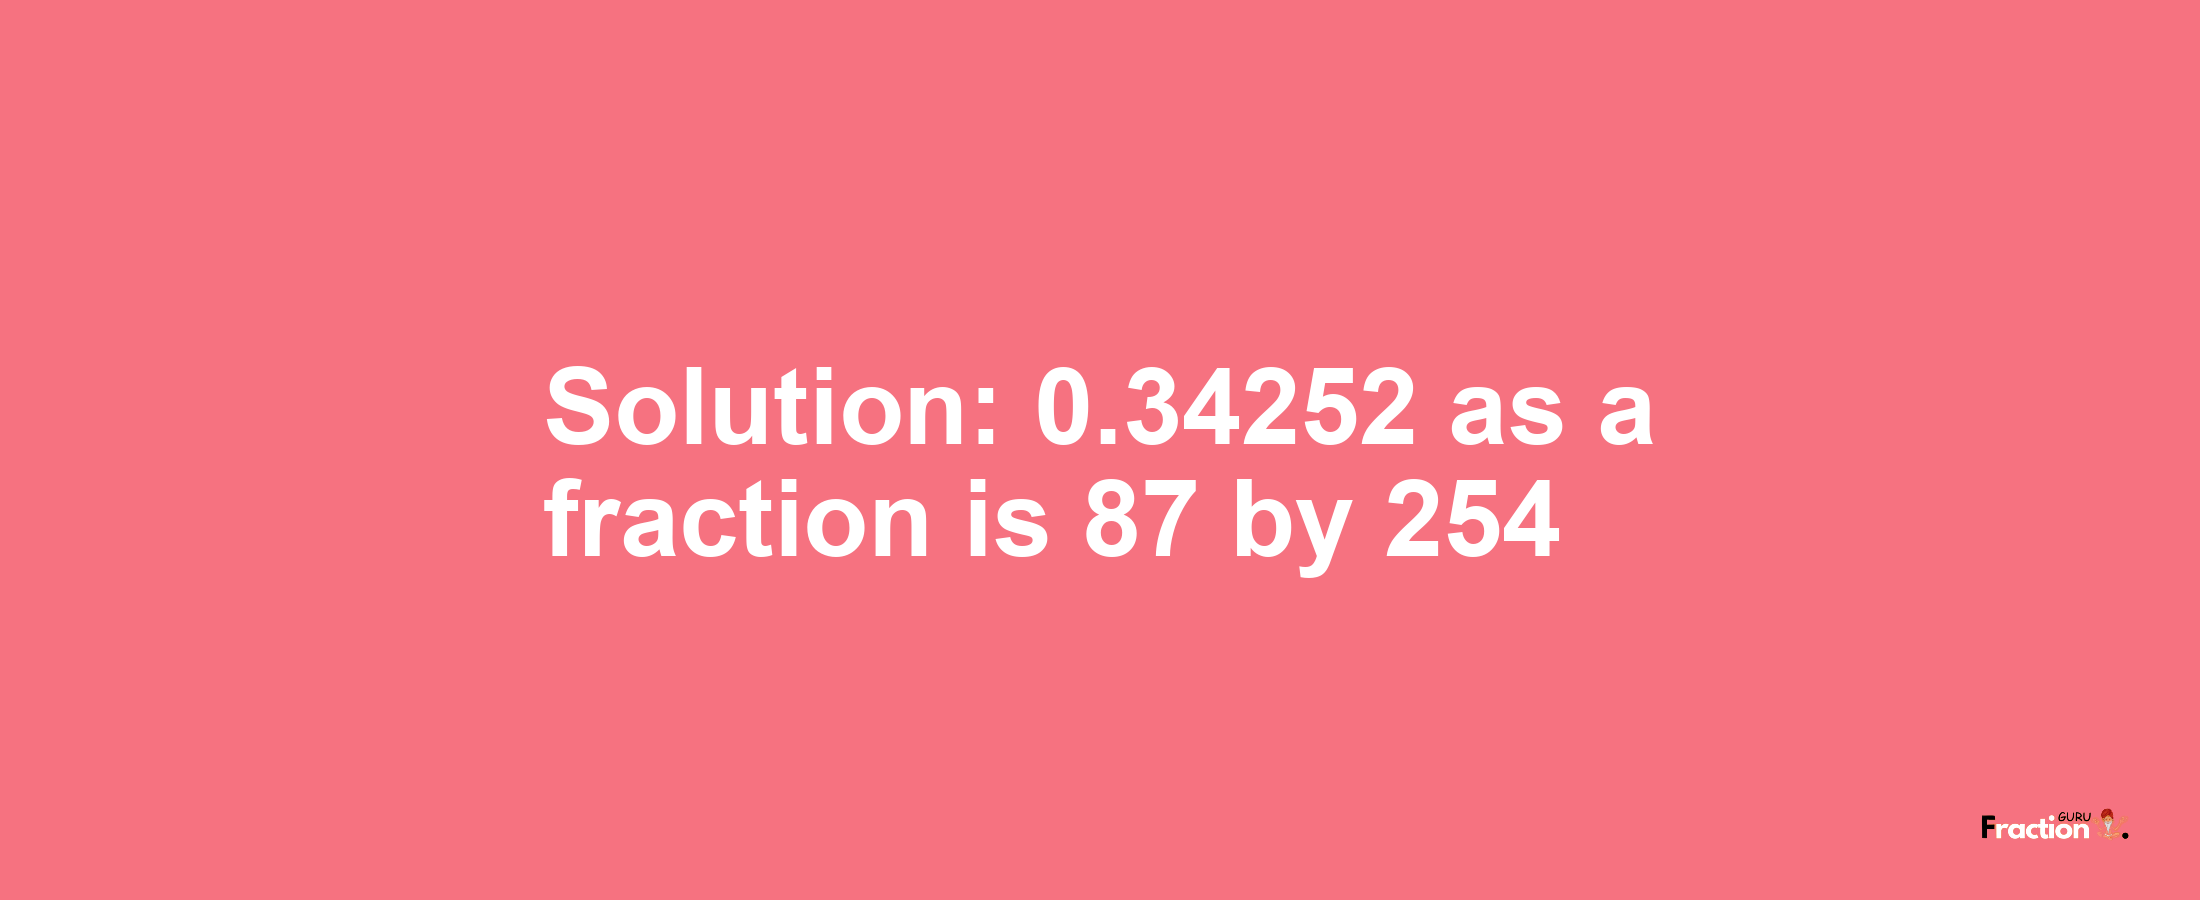 Solution:0.34252 as a fraction is 87/254